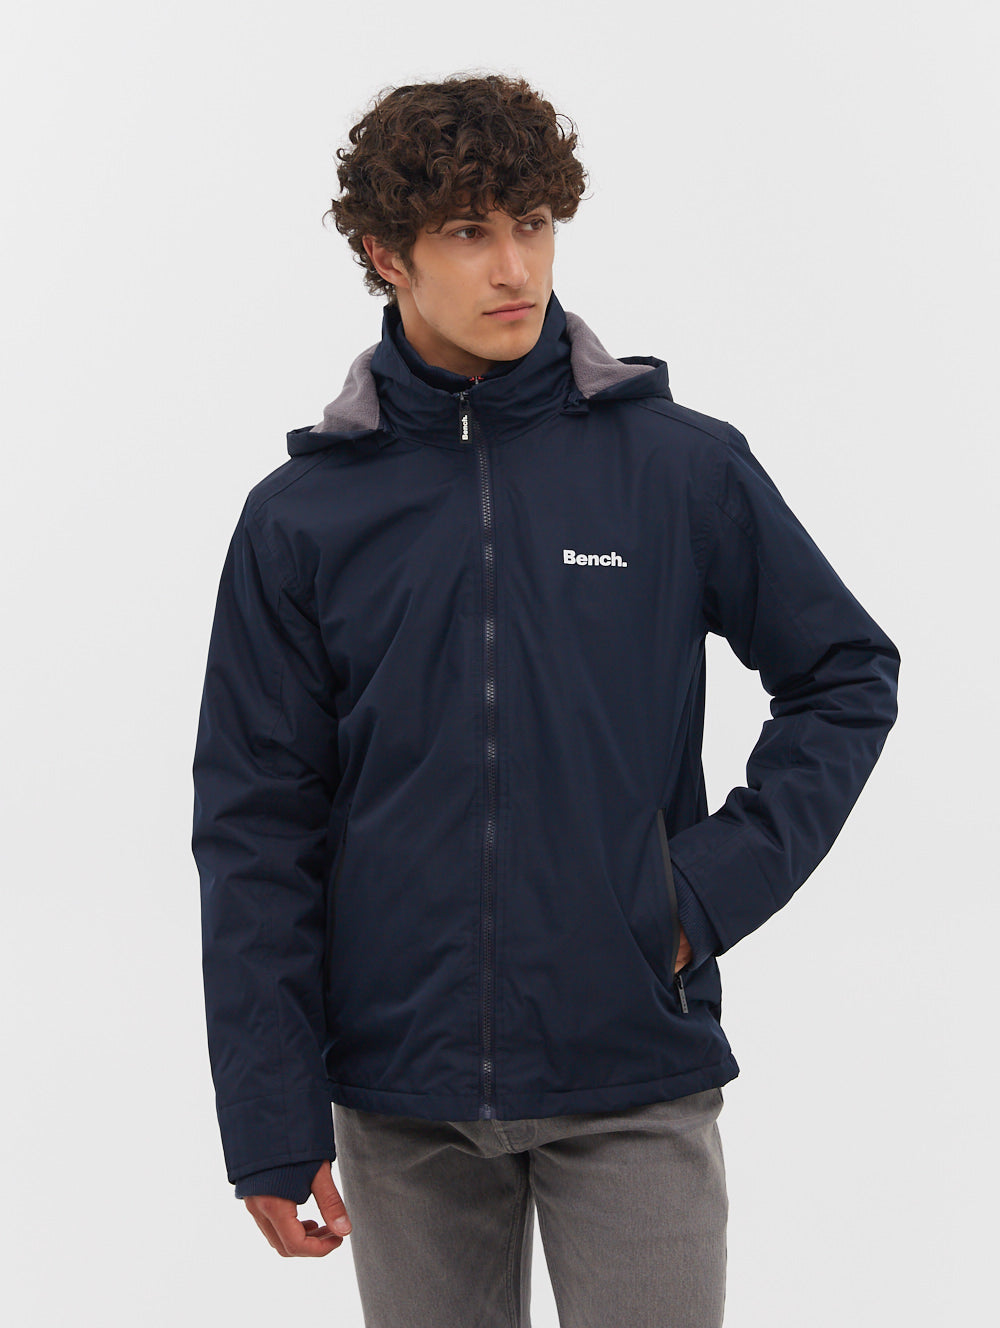 Men's Hooded Jackets, Explore our New Arrivals